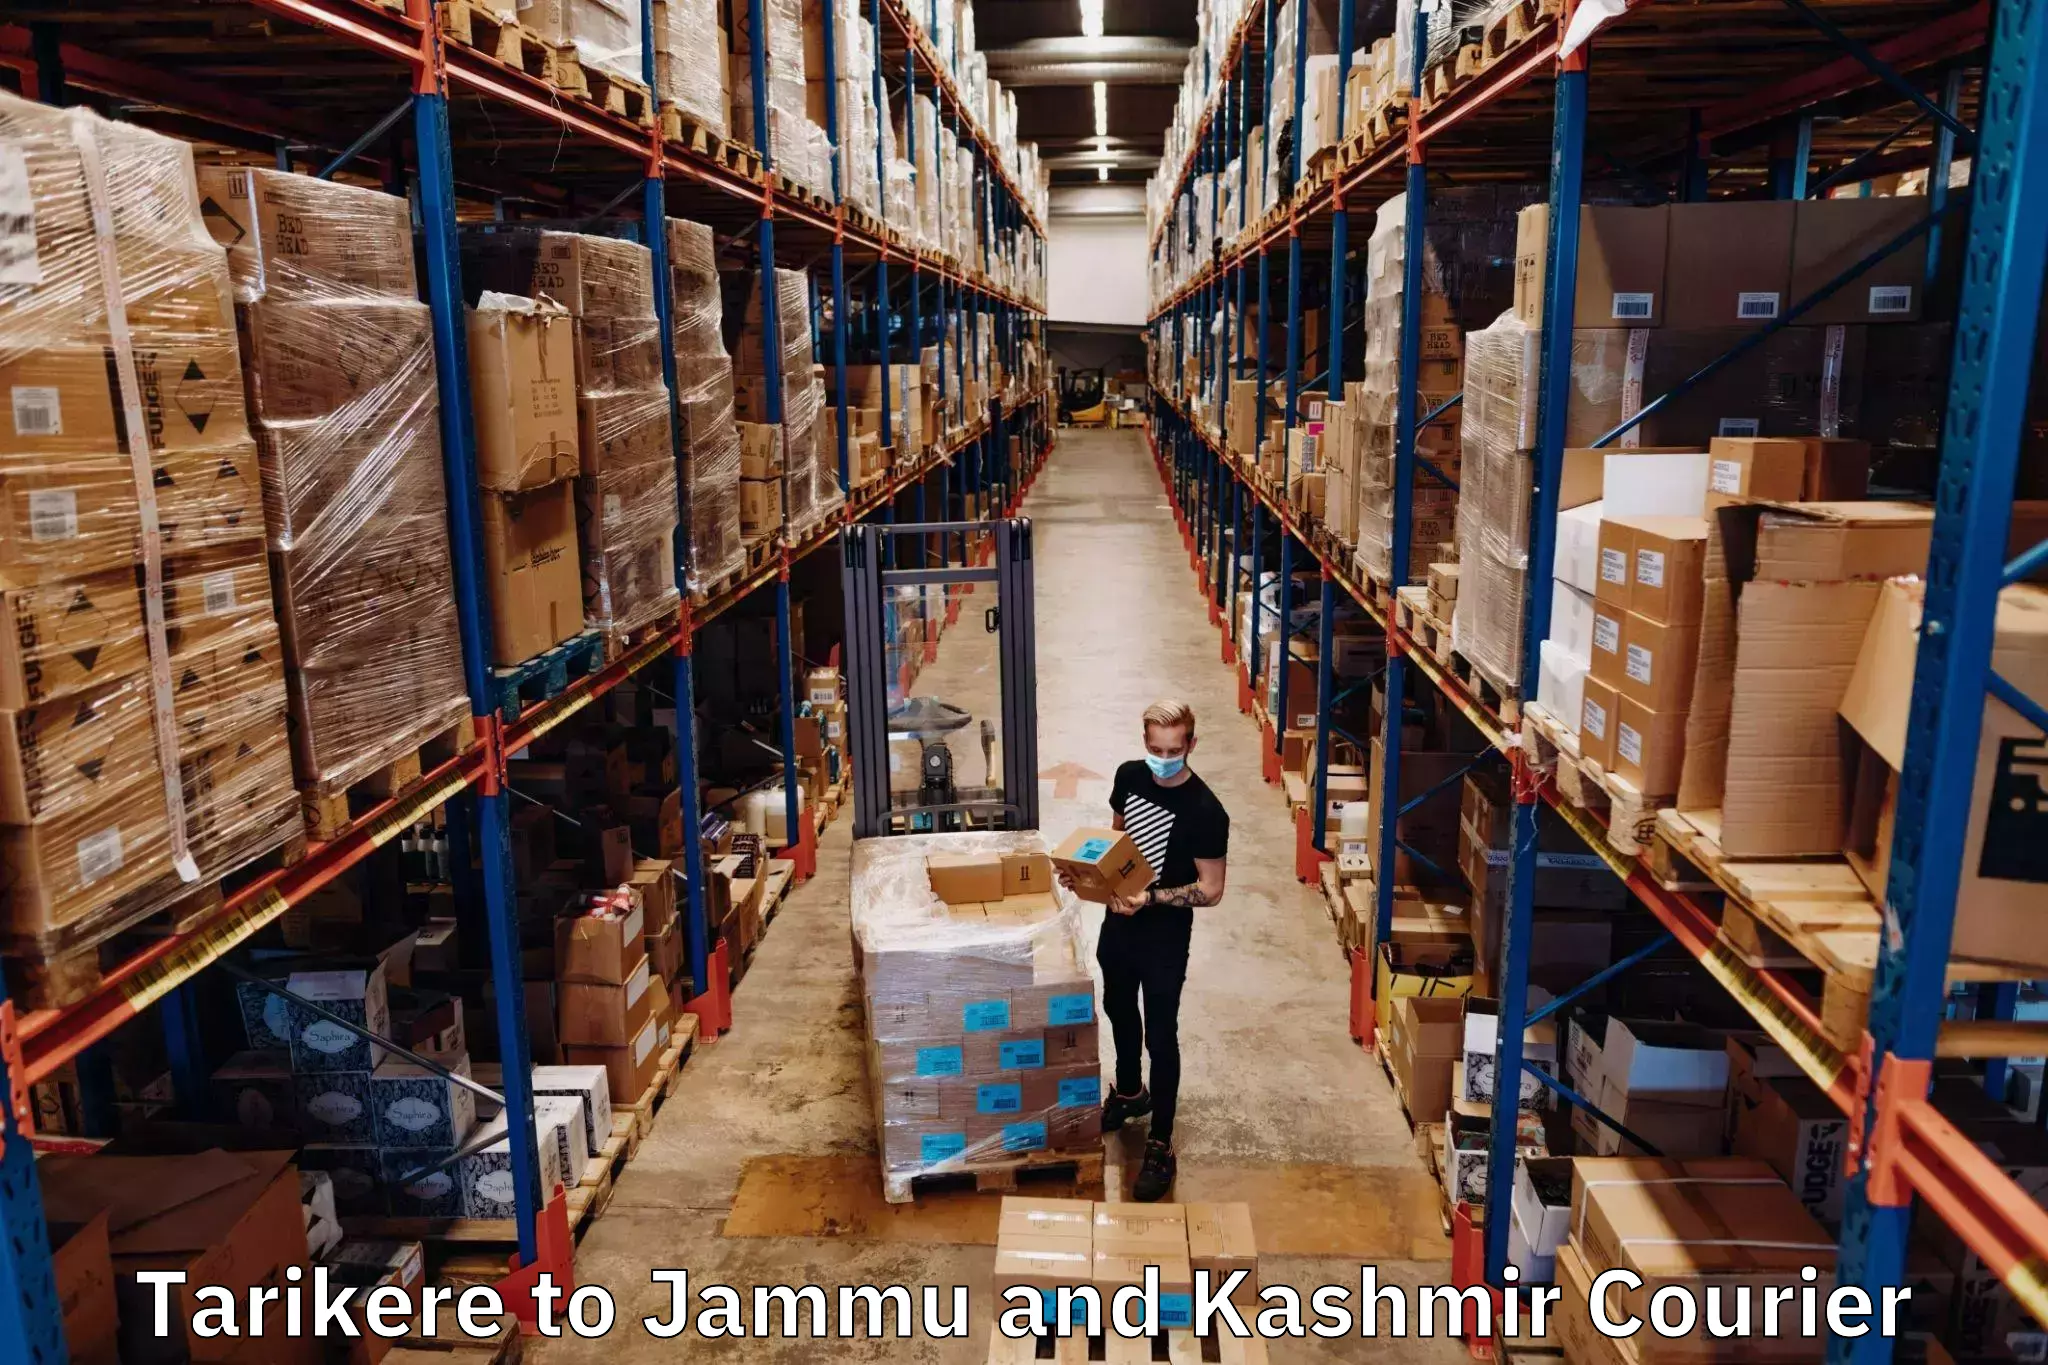 Cost-effective courier options Tarikere to Anantnag